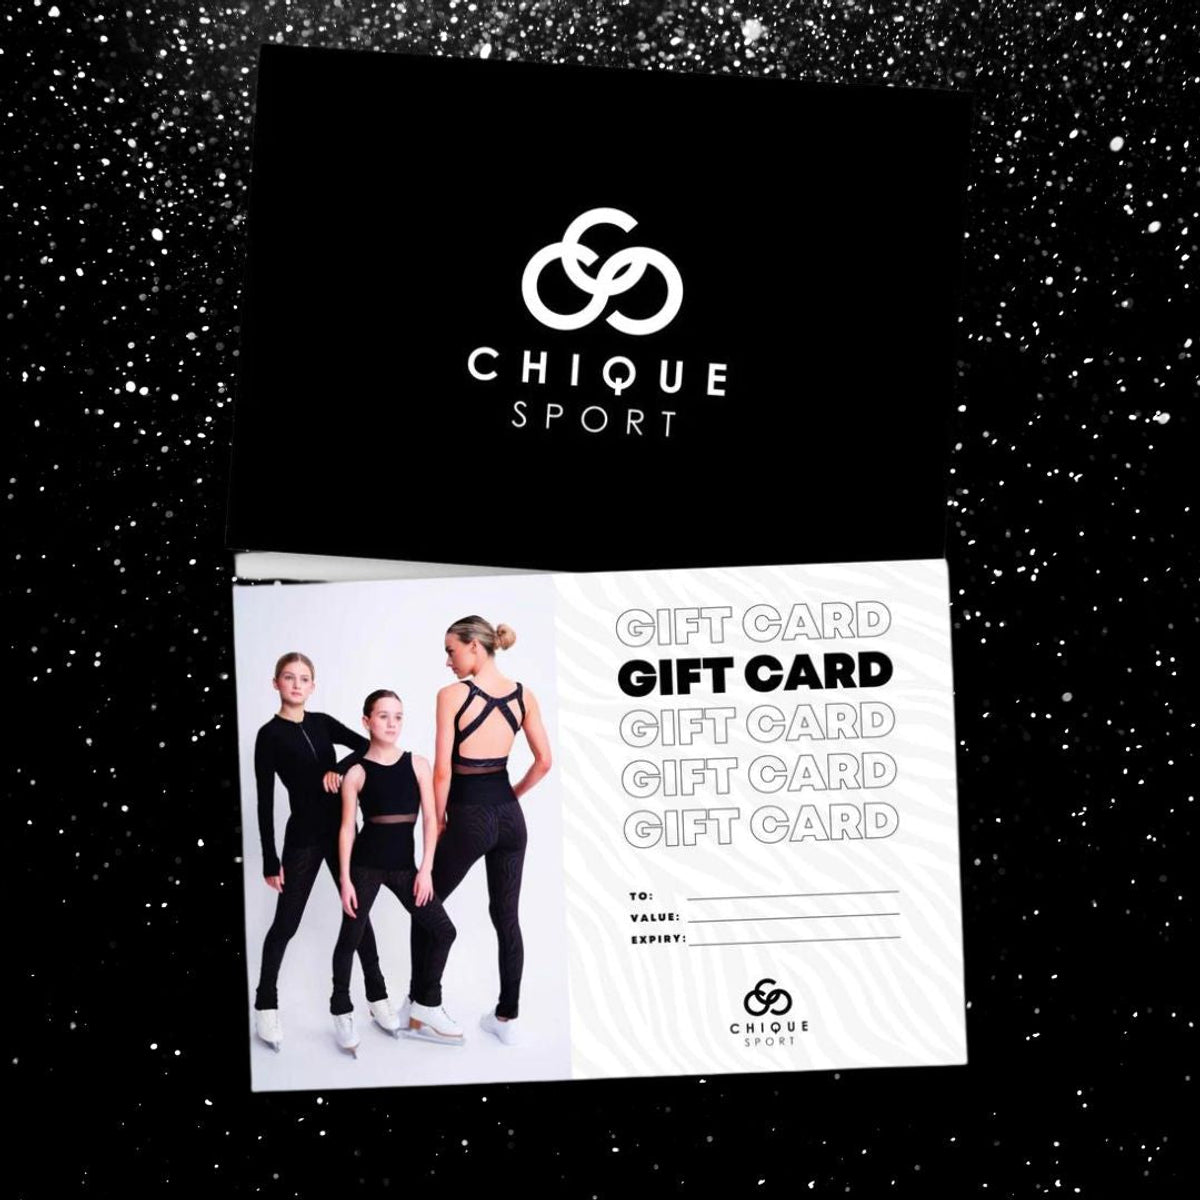 TREAT SOMEONE TO A CHIQUE SPORT GIFT CARD! - Chique Sport